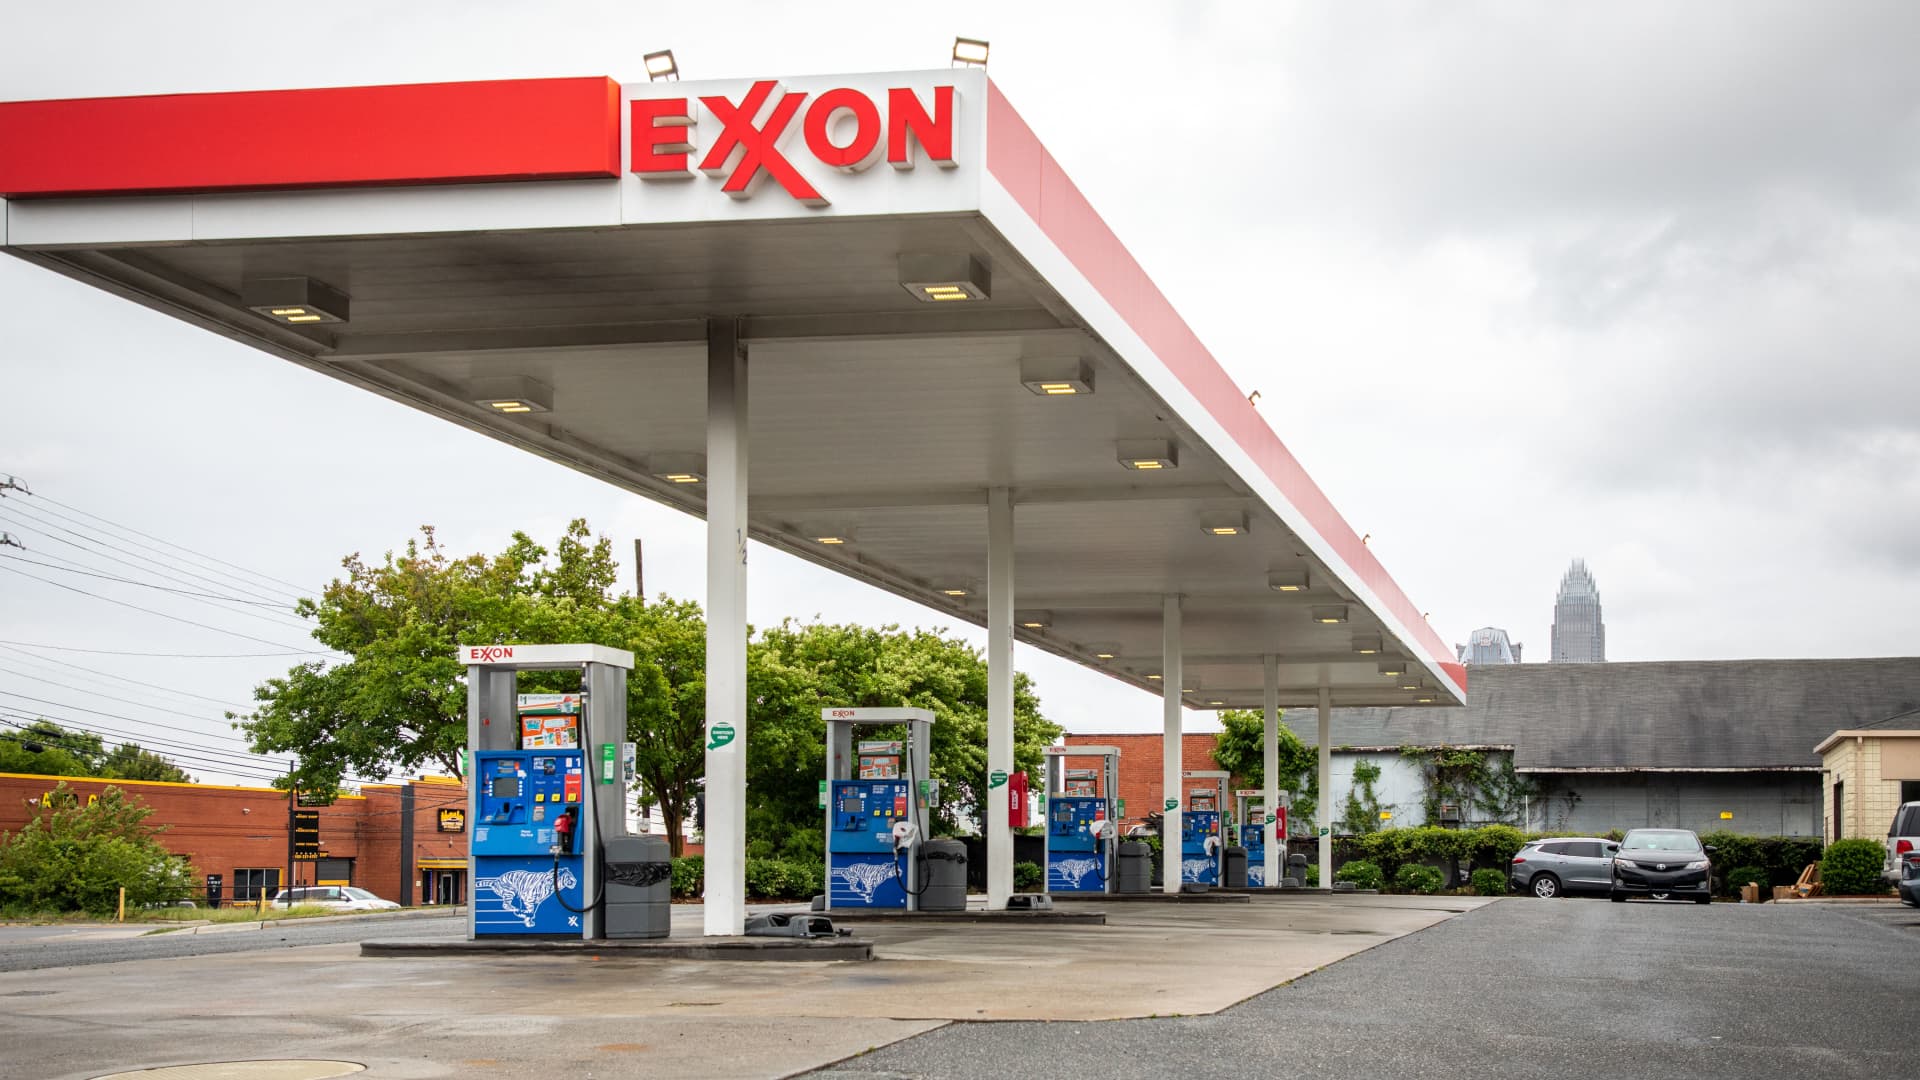 Gas pumps sit empty at an Exxon gas station in Charlotte, North Carolina on May 12, 2021.